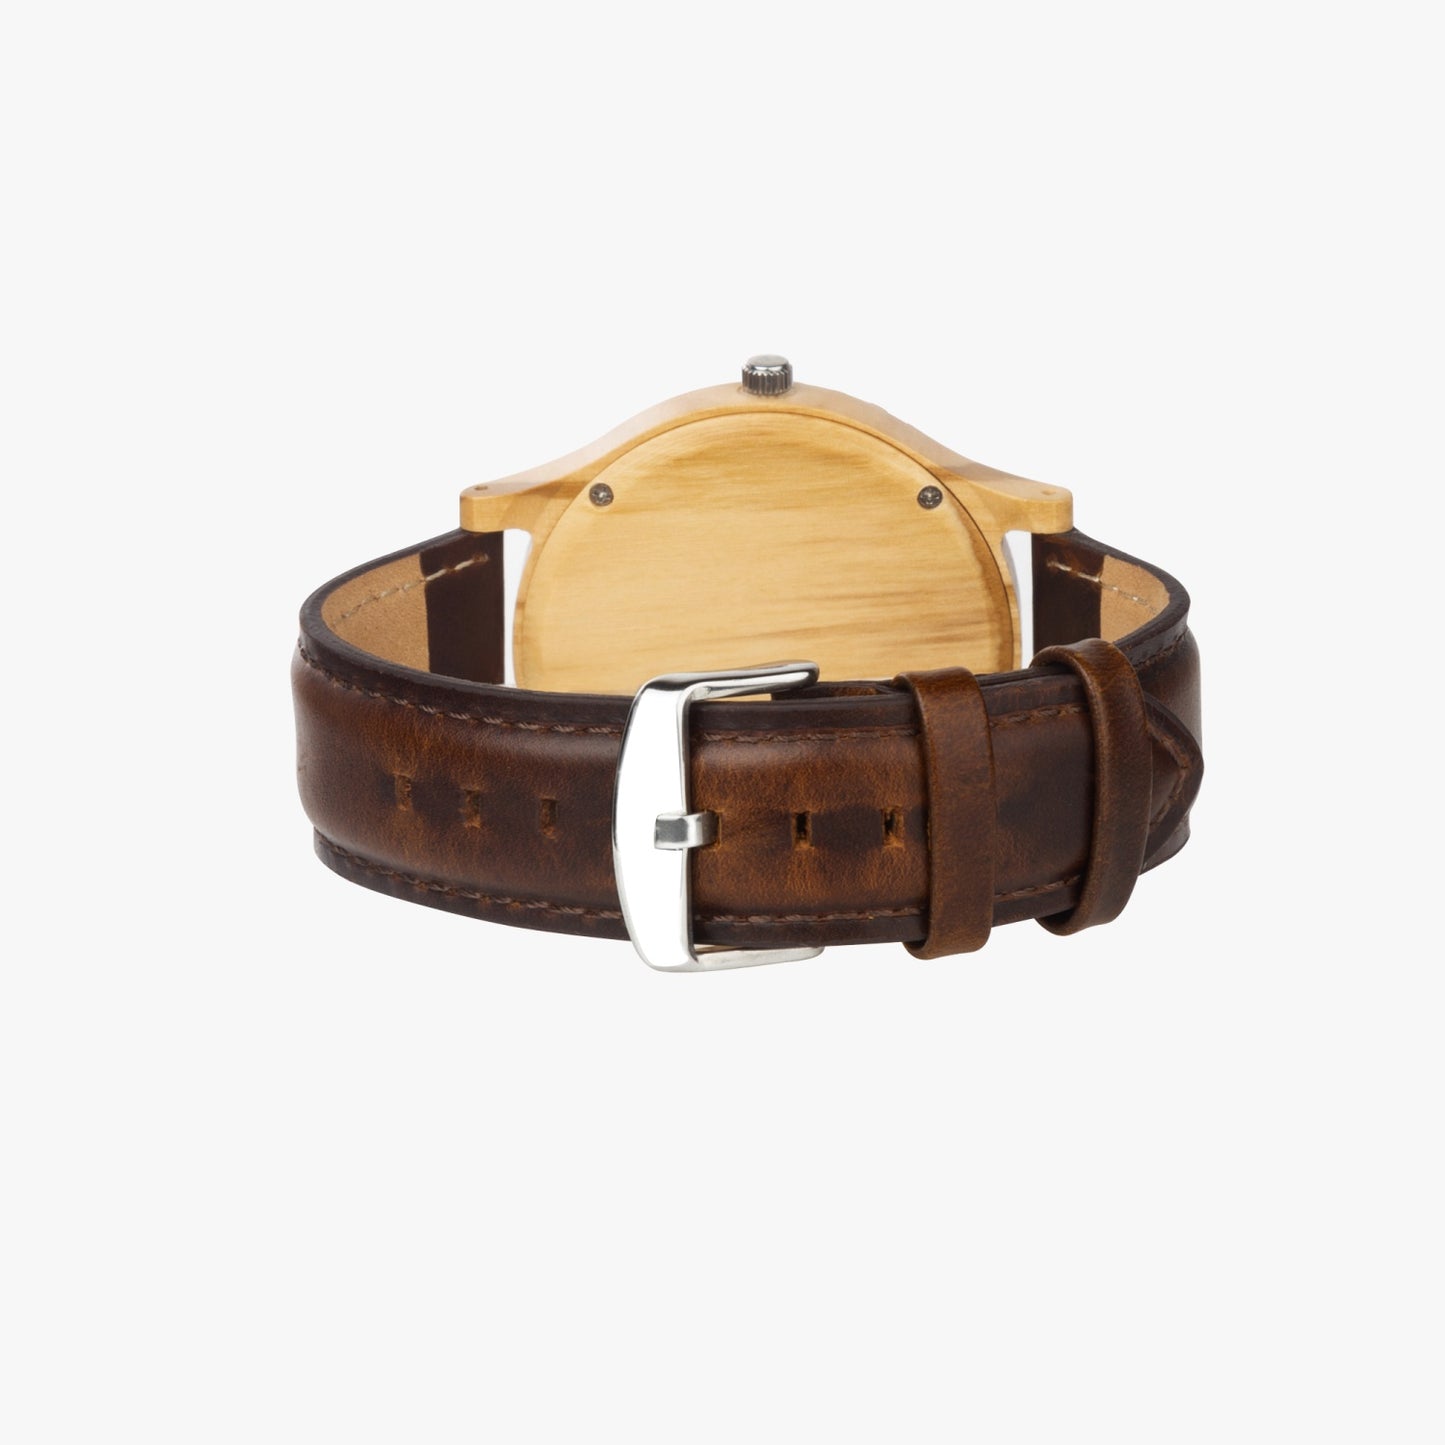 Hebrew Wooden Watch - Brown Leather Strap back